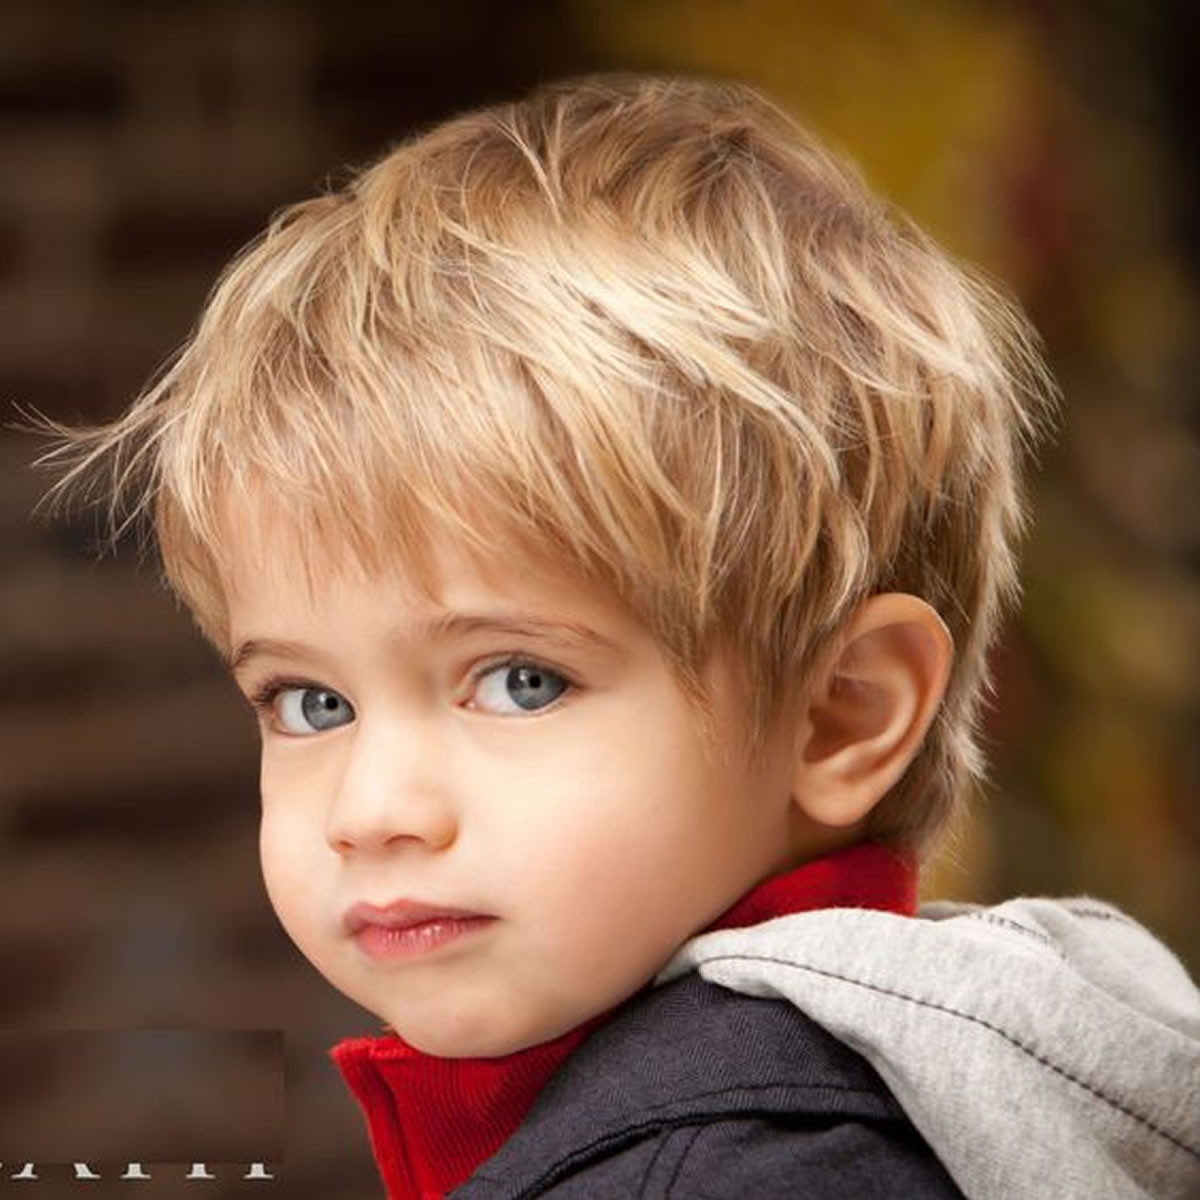 Hairstyles Boys 2019
 Great Hairstyles and Haircuts ideas for Little Boys 2018